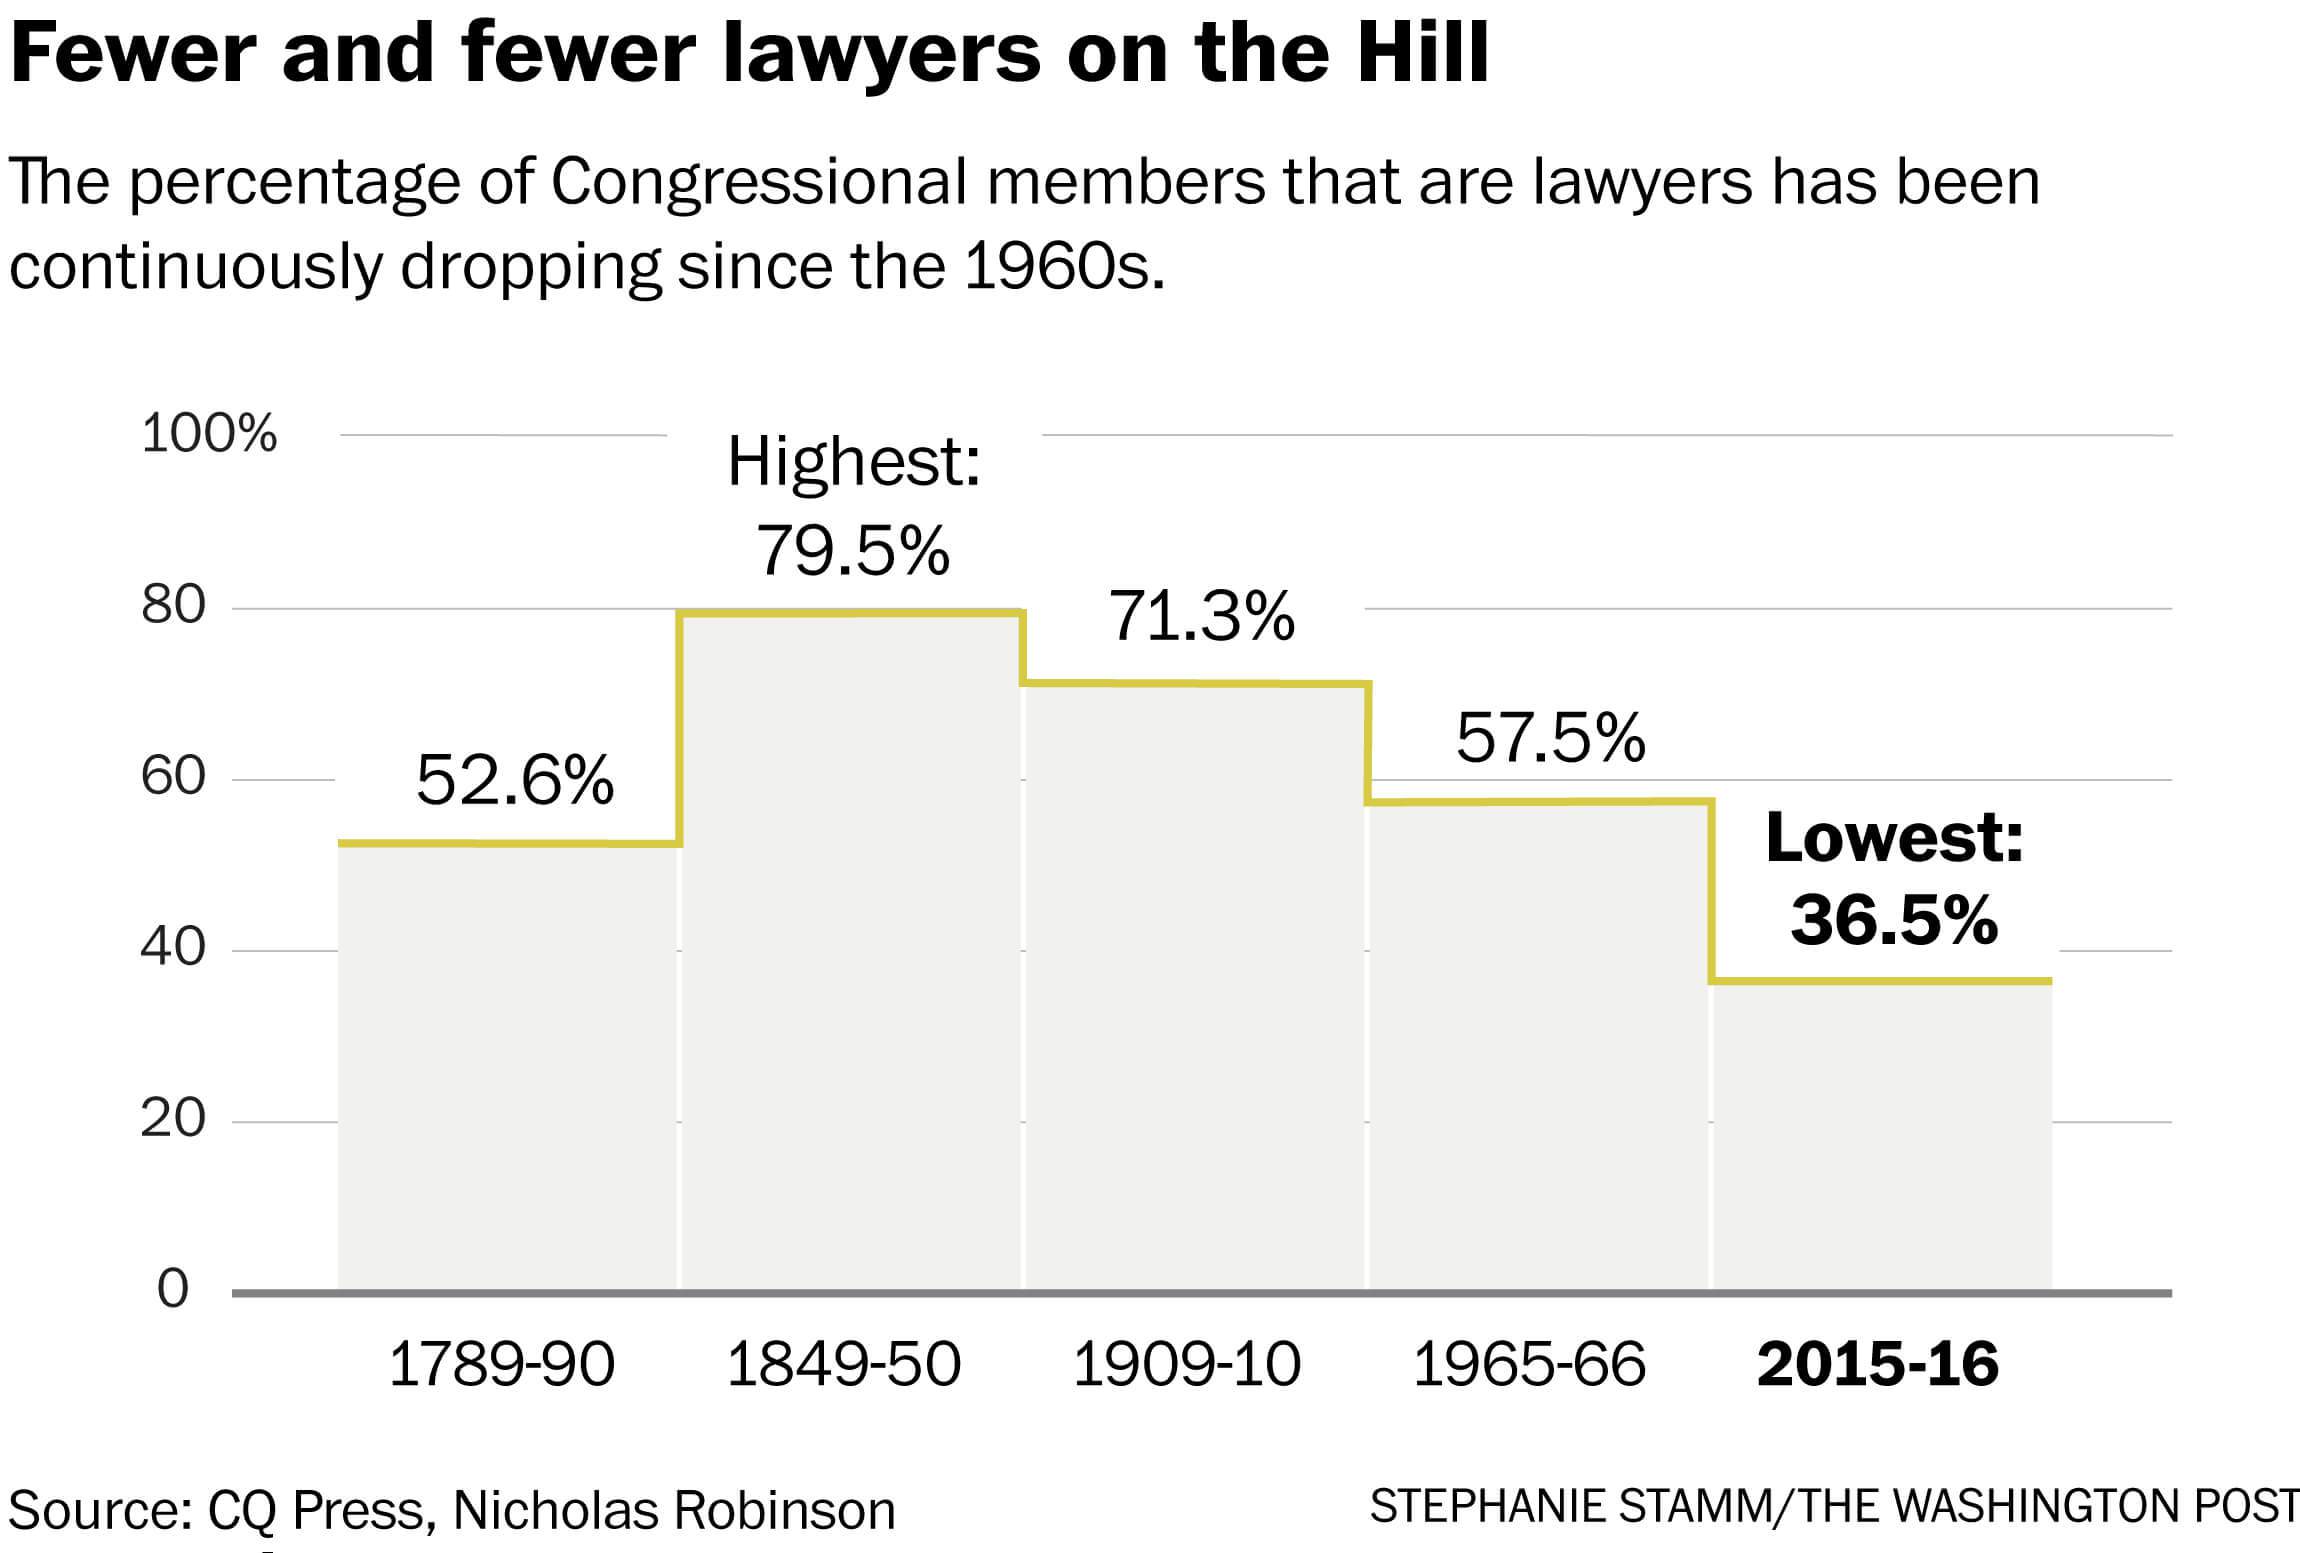 Proportion of congress members who are lawyers over time.